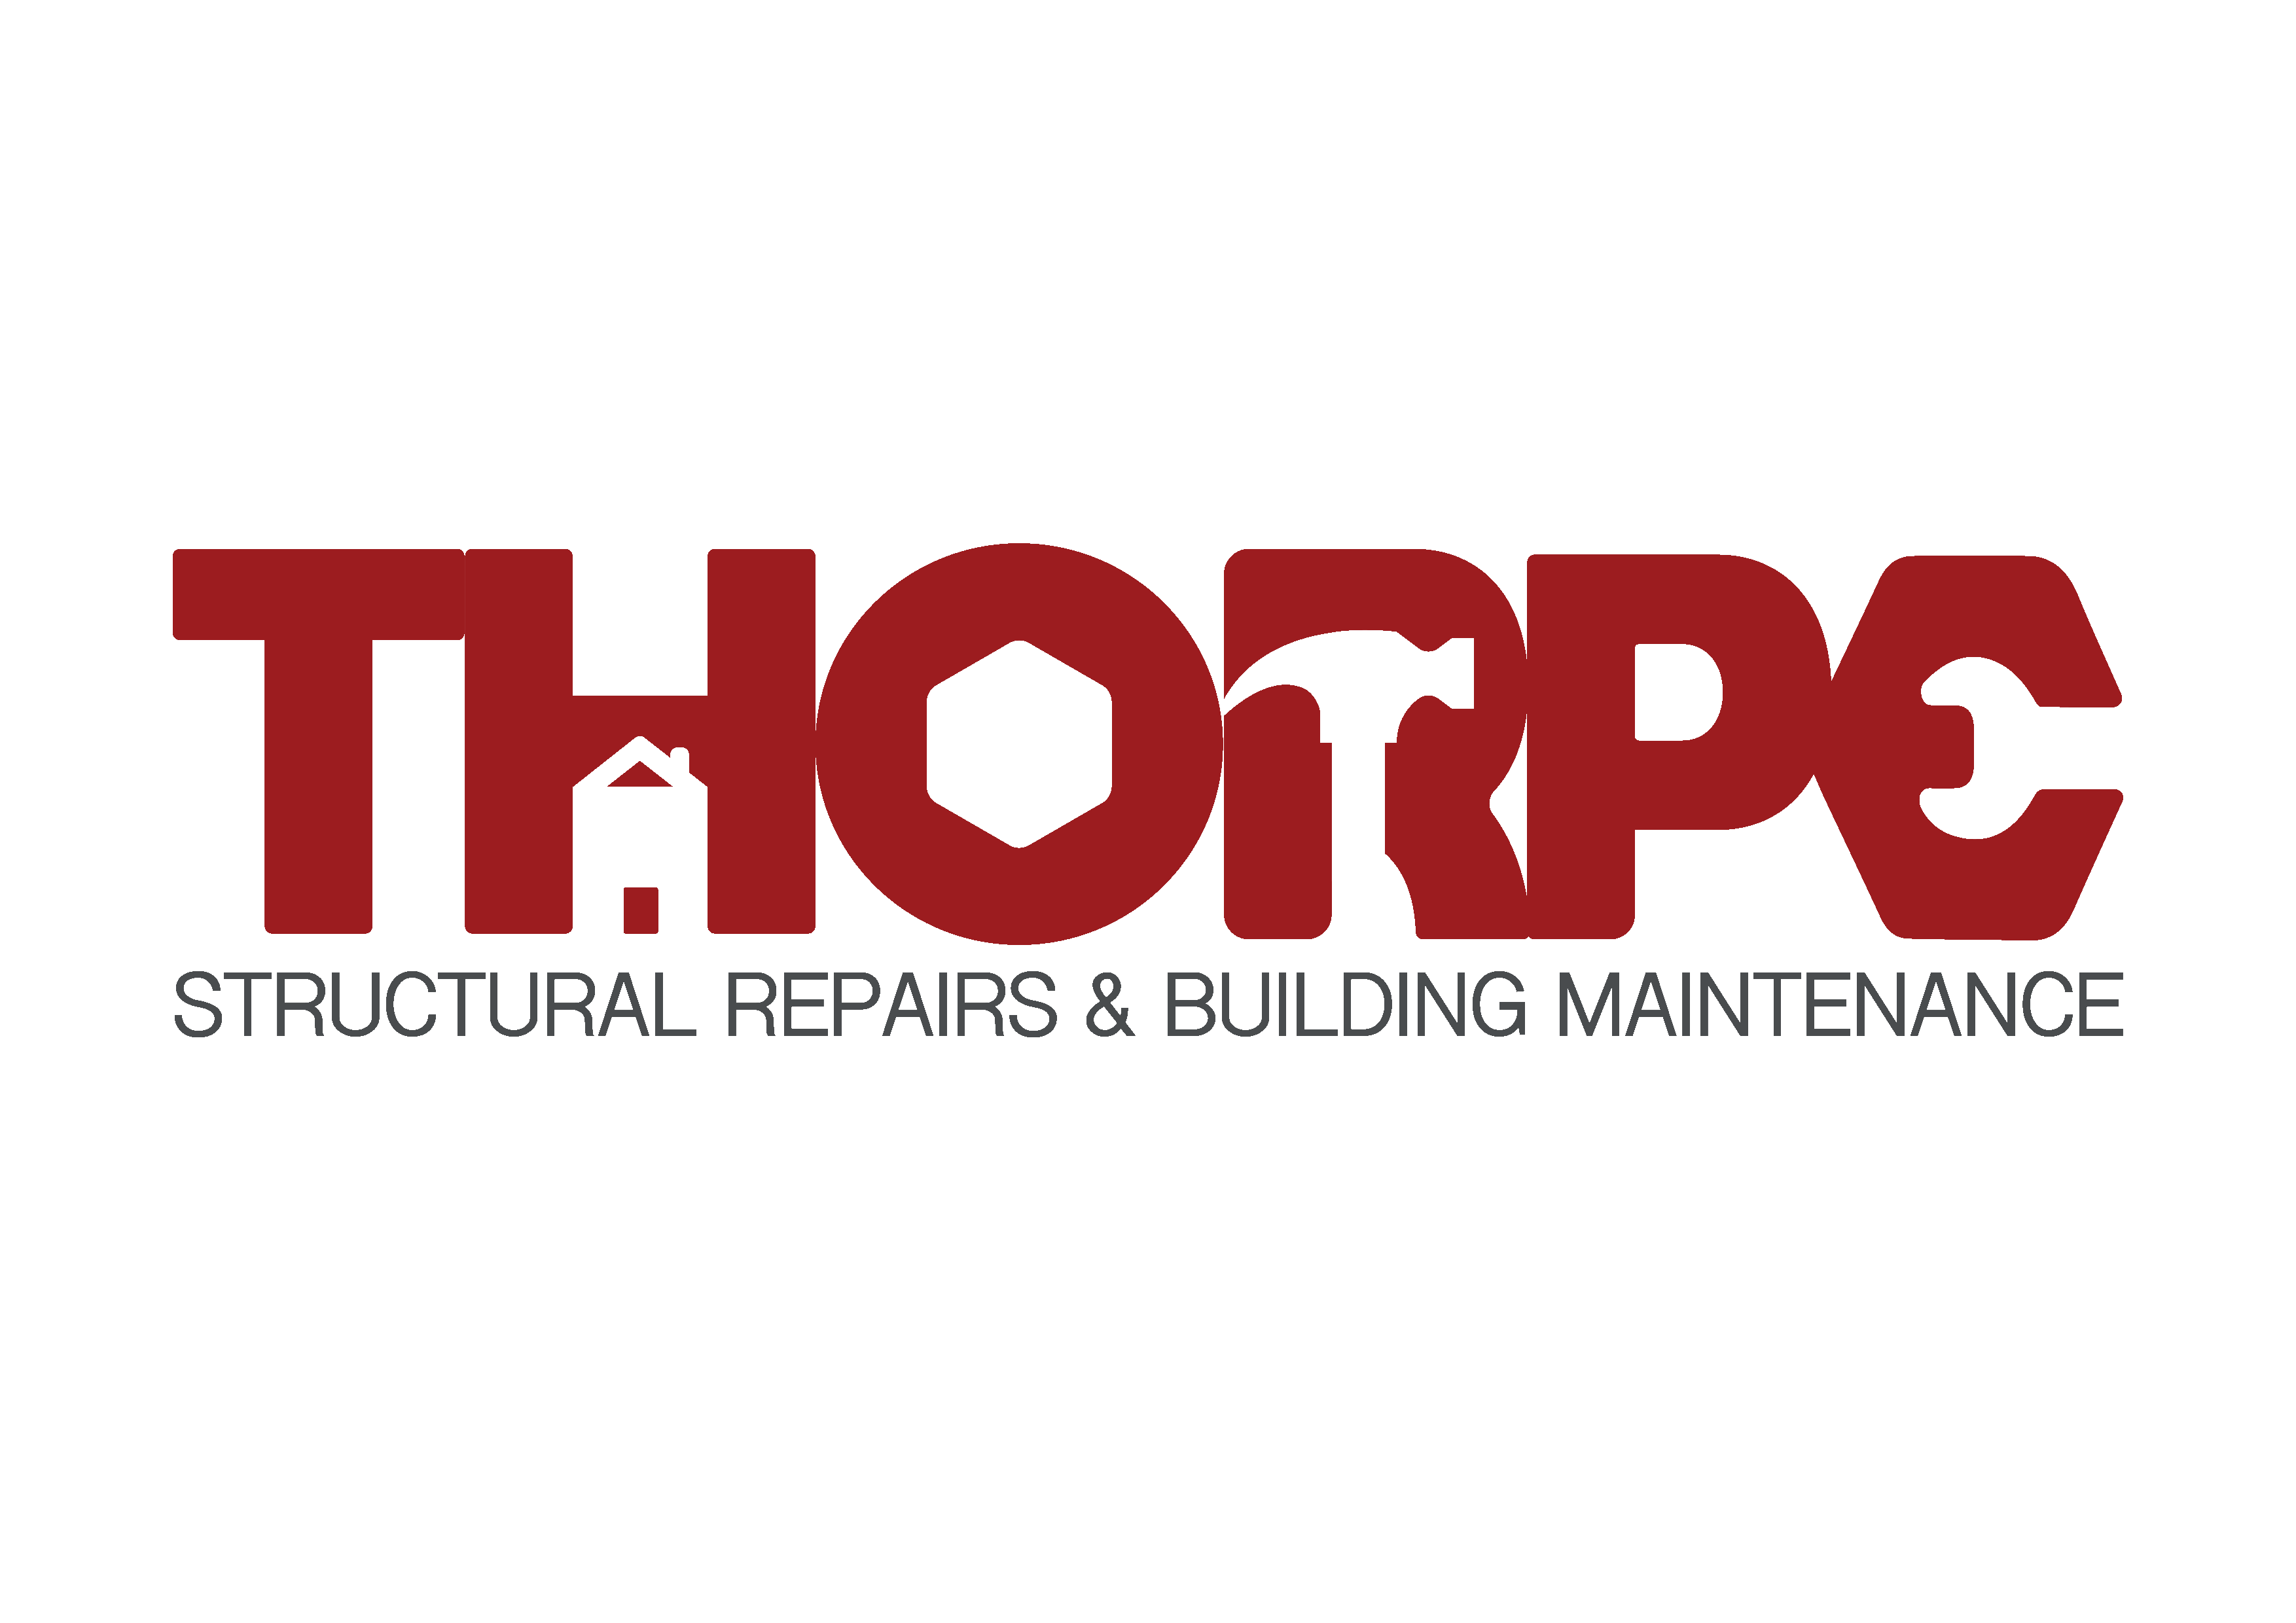 Logo of Thorpe Structural Repairs & Building Maintenance Construction In Norwich, Norfolk